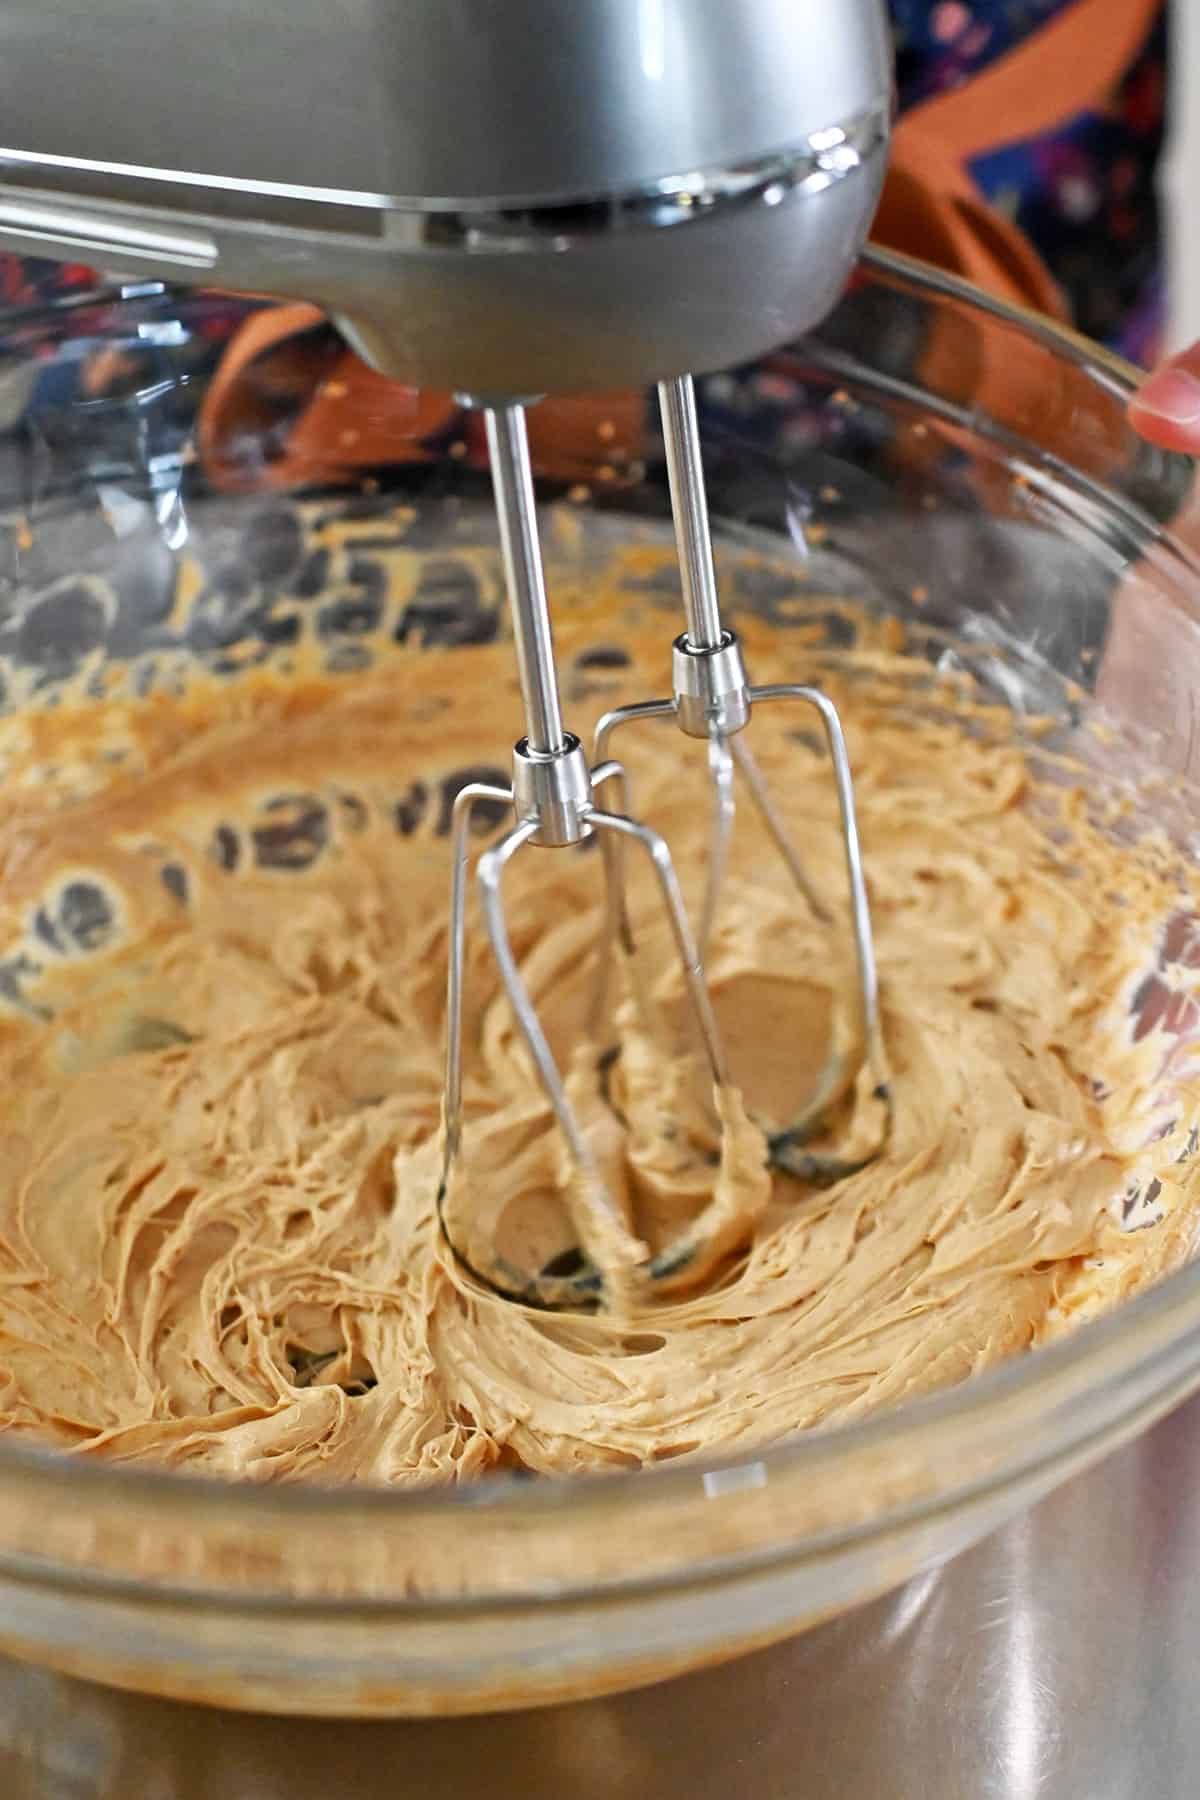 The paleo and gluten free snickerdoodle batter is lighter in color after being mixed for 3 to 4 minutes with a hand mixer.